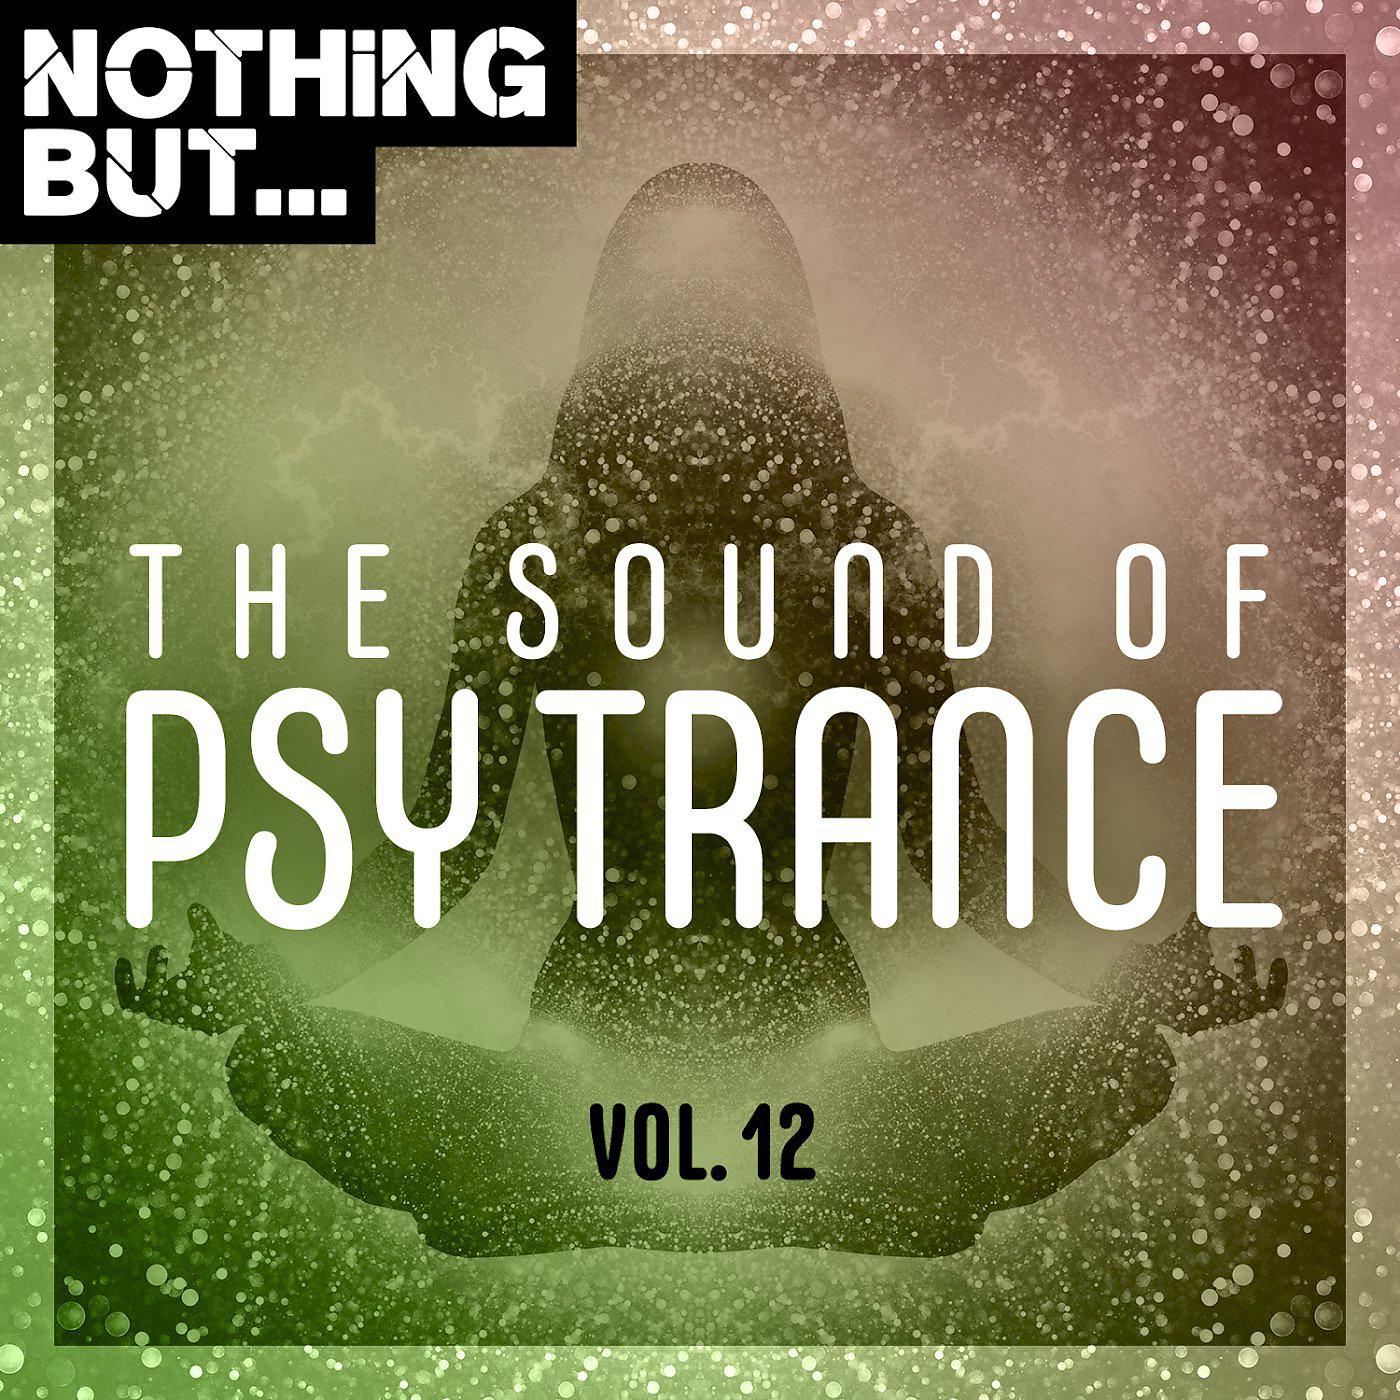 Постер альбома Nothing But... The Sound of Psy Trance, Vol. 12